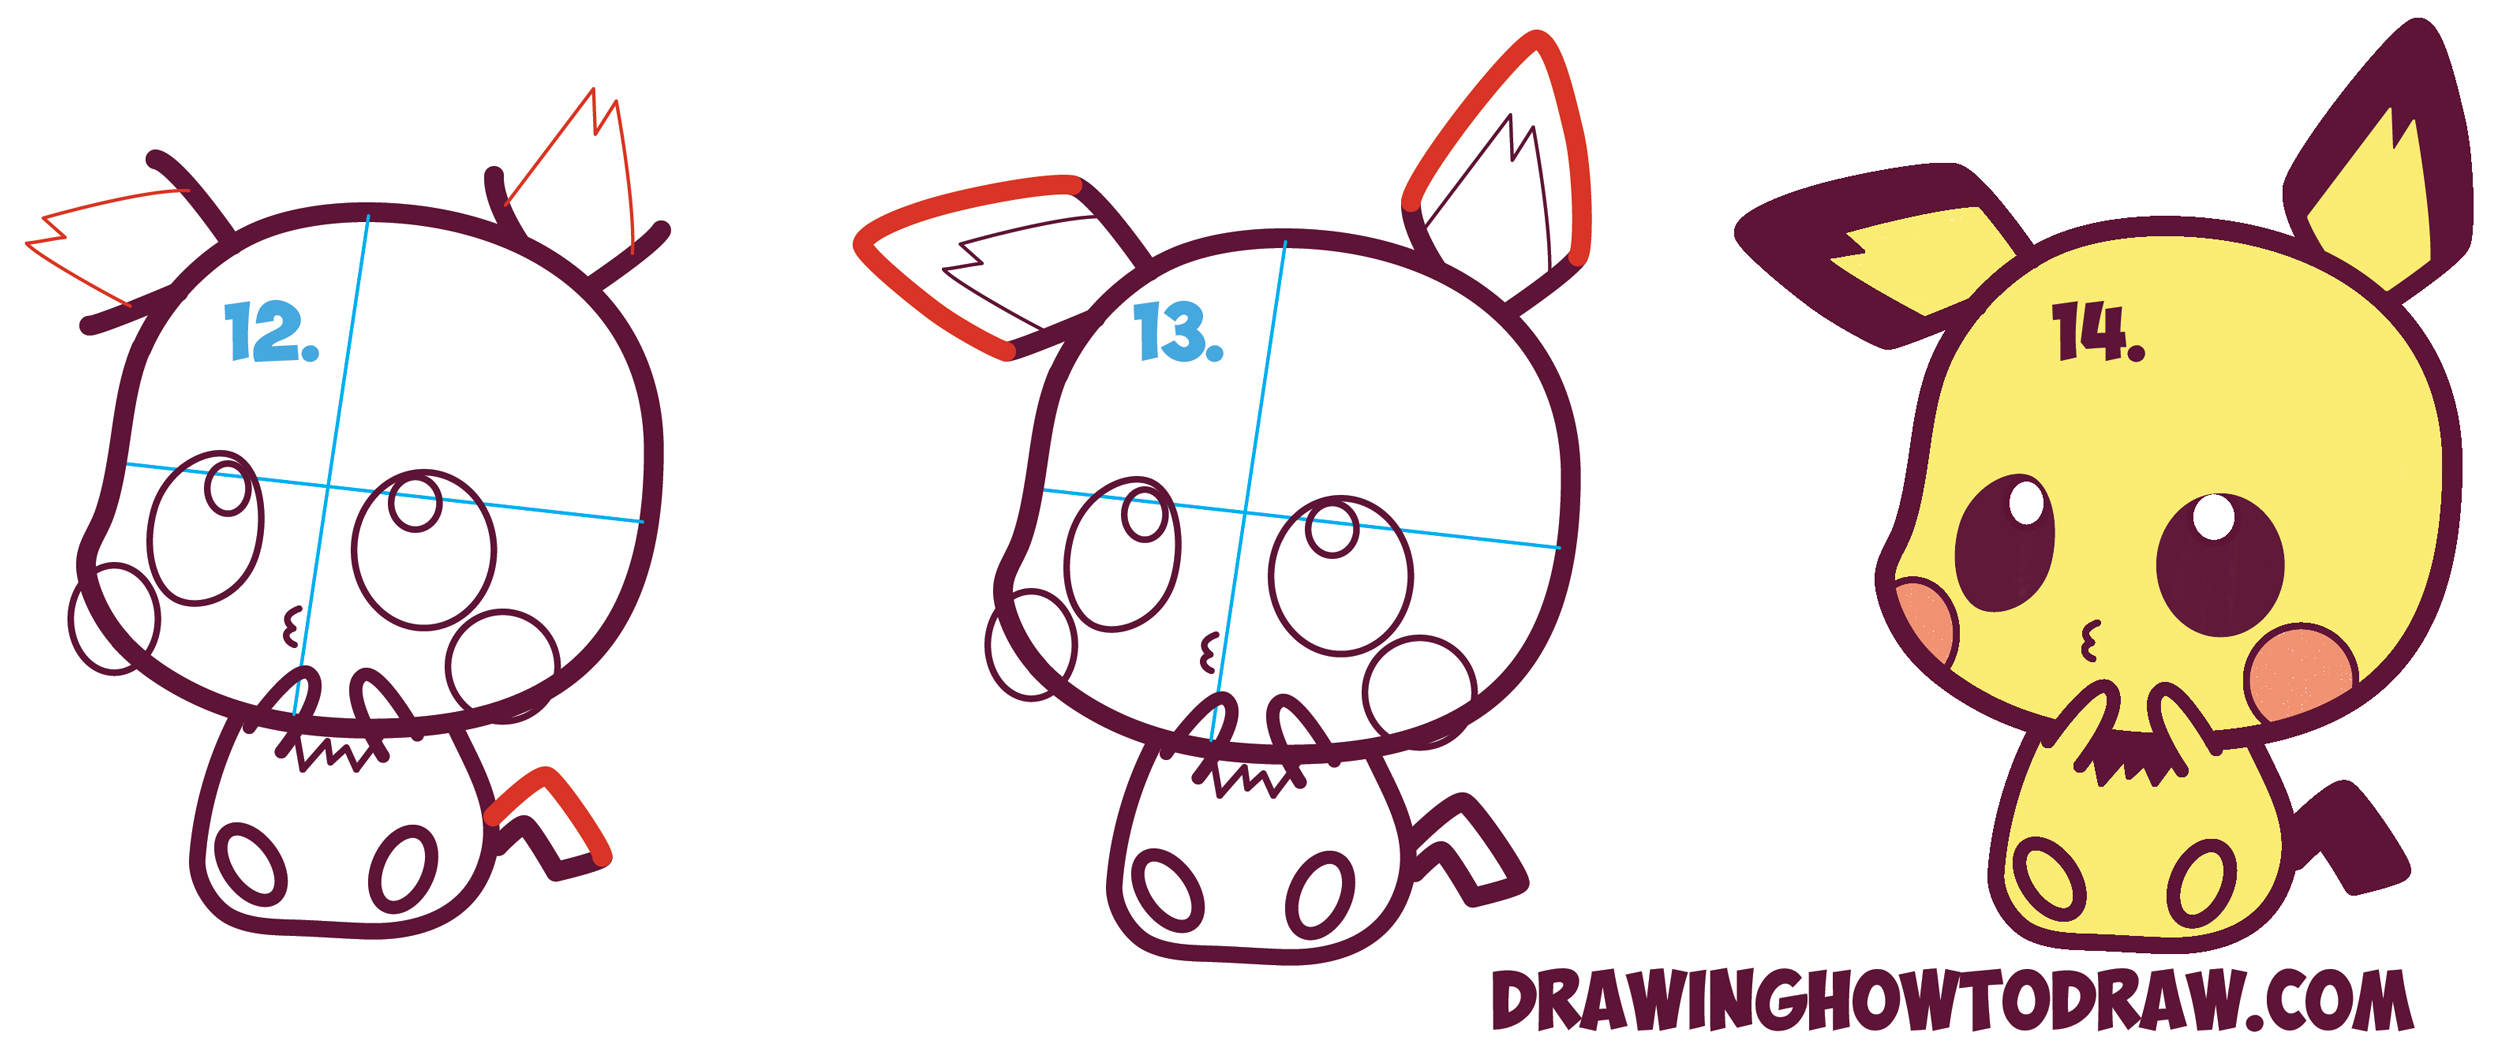 Learn How to Draw Cute / Kawaii / Chibi Pichu from Pokemon in Simple Steps Drawing Lesson for Kids and Beginners